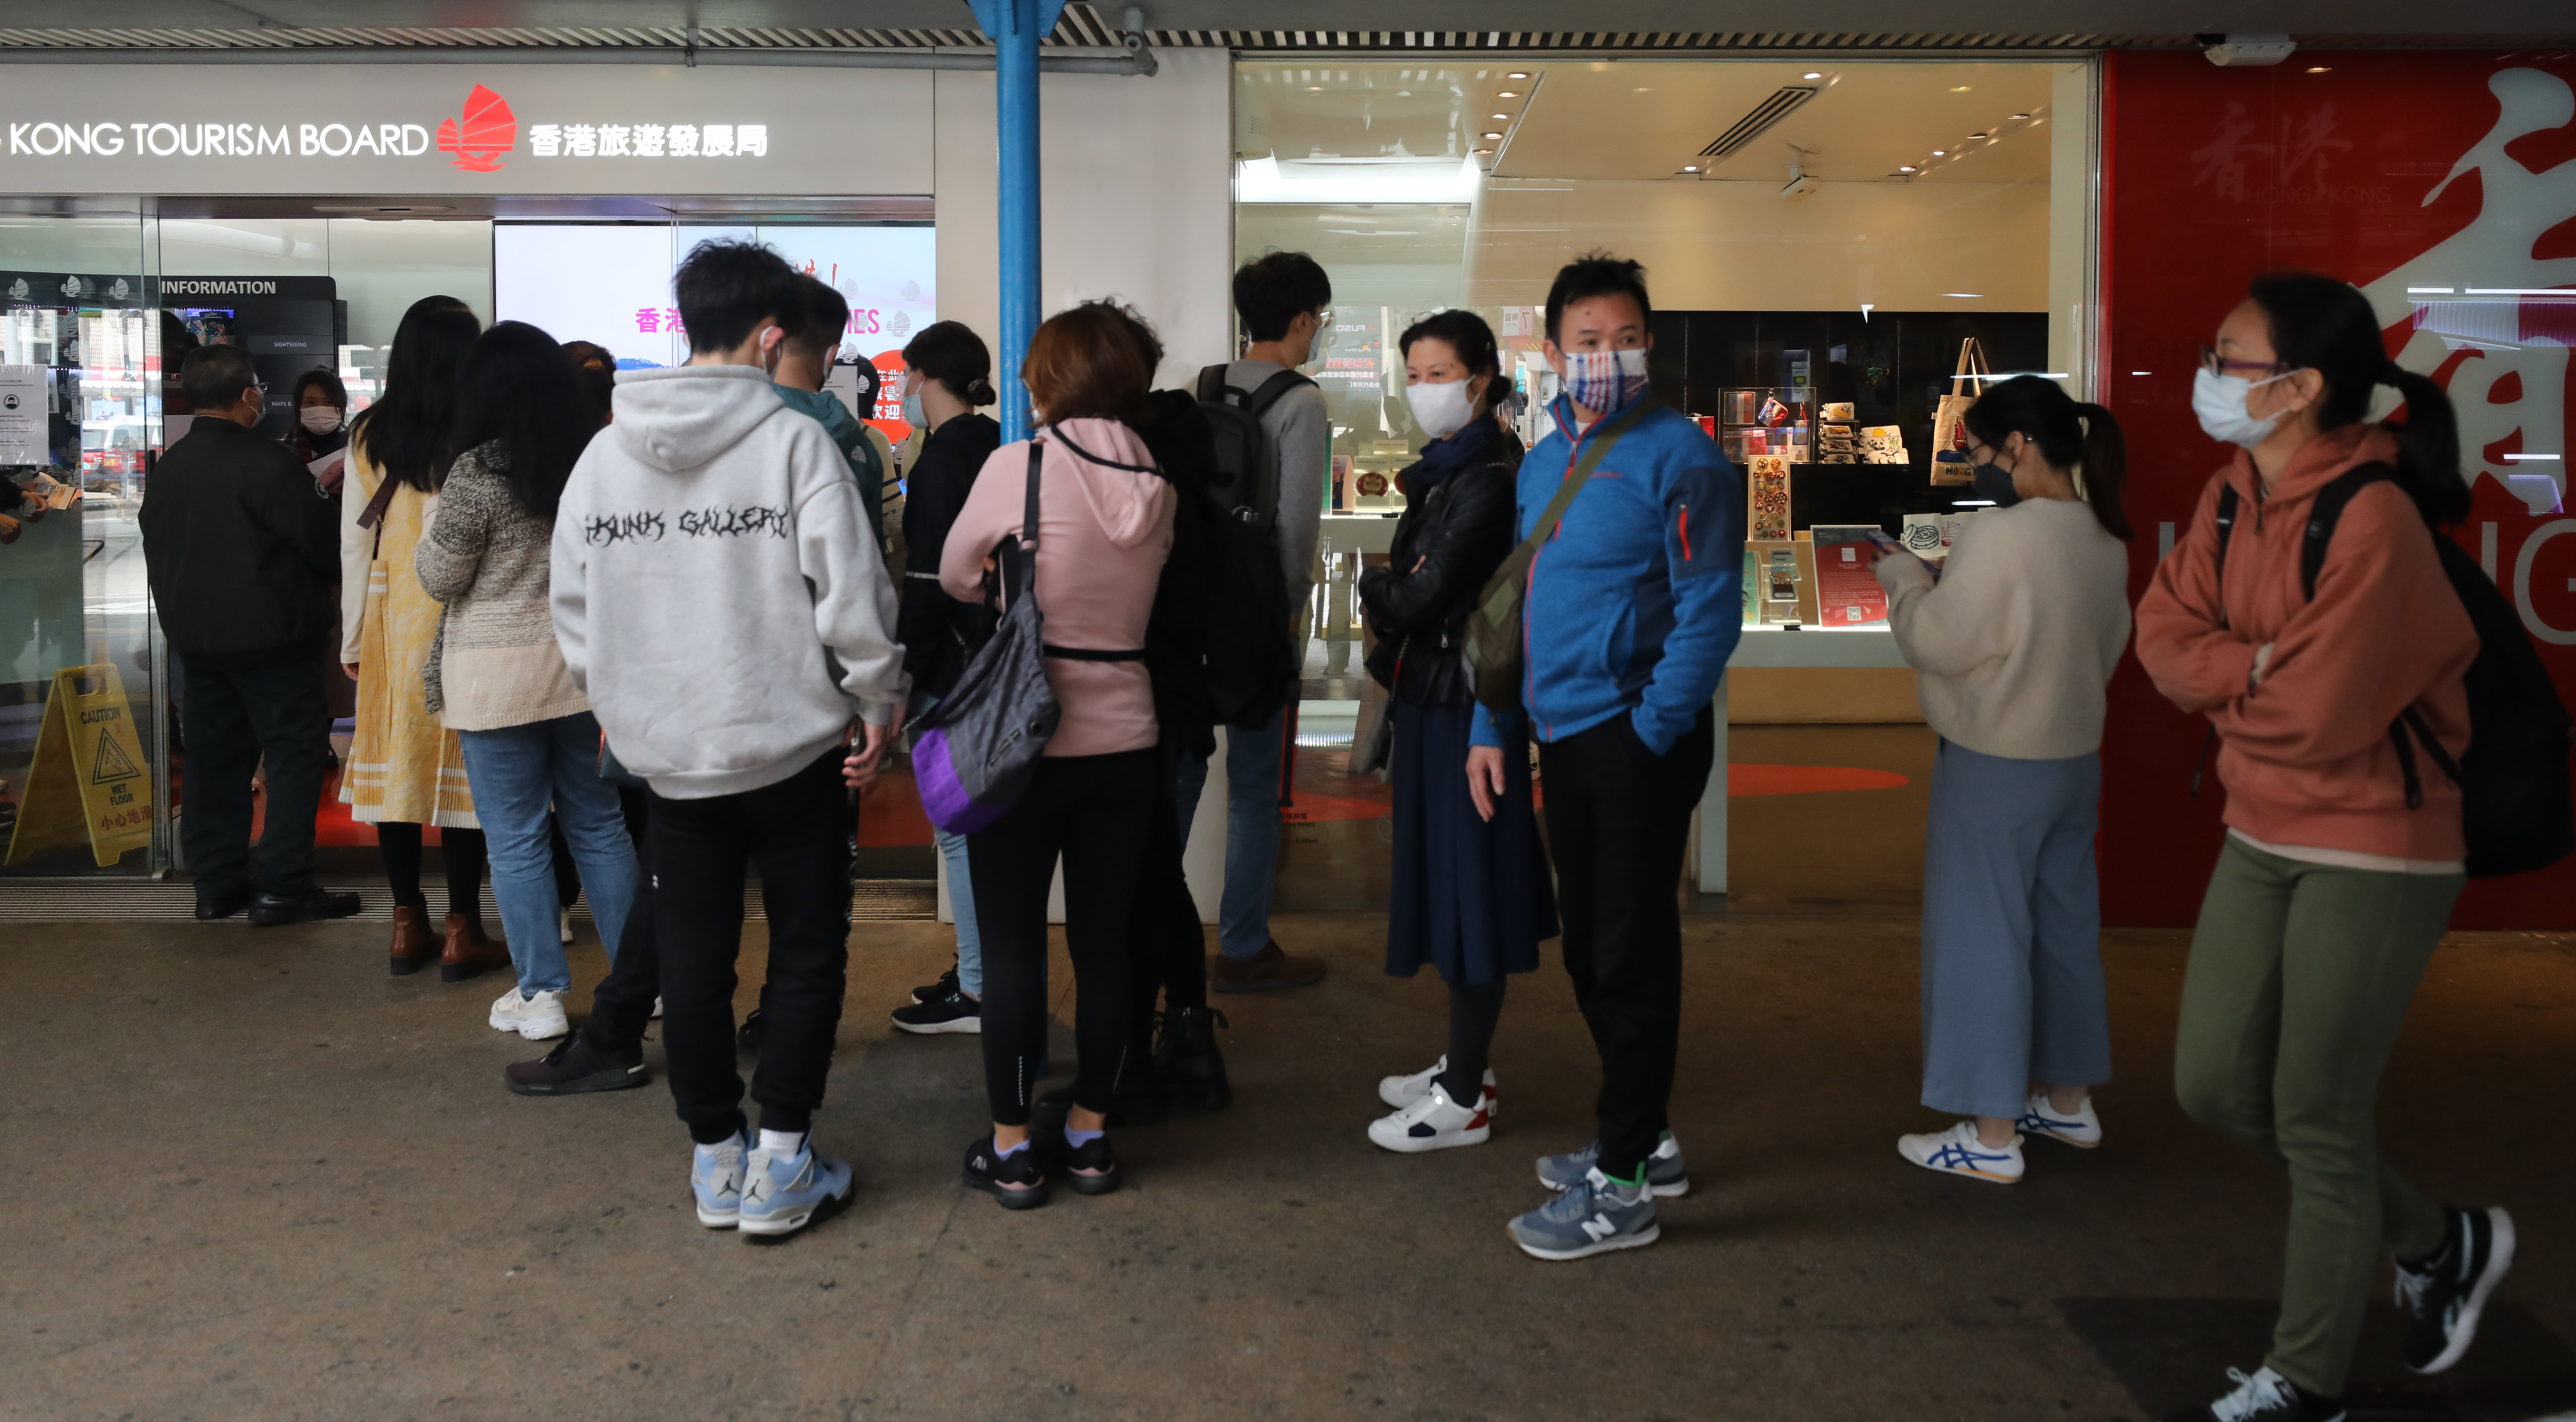 The Hong Kong Tourism Board Visitor Centre in Tsim Sha Tsui is busy as people queue up to claim vouchers. Photo: Xiaomei Chen